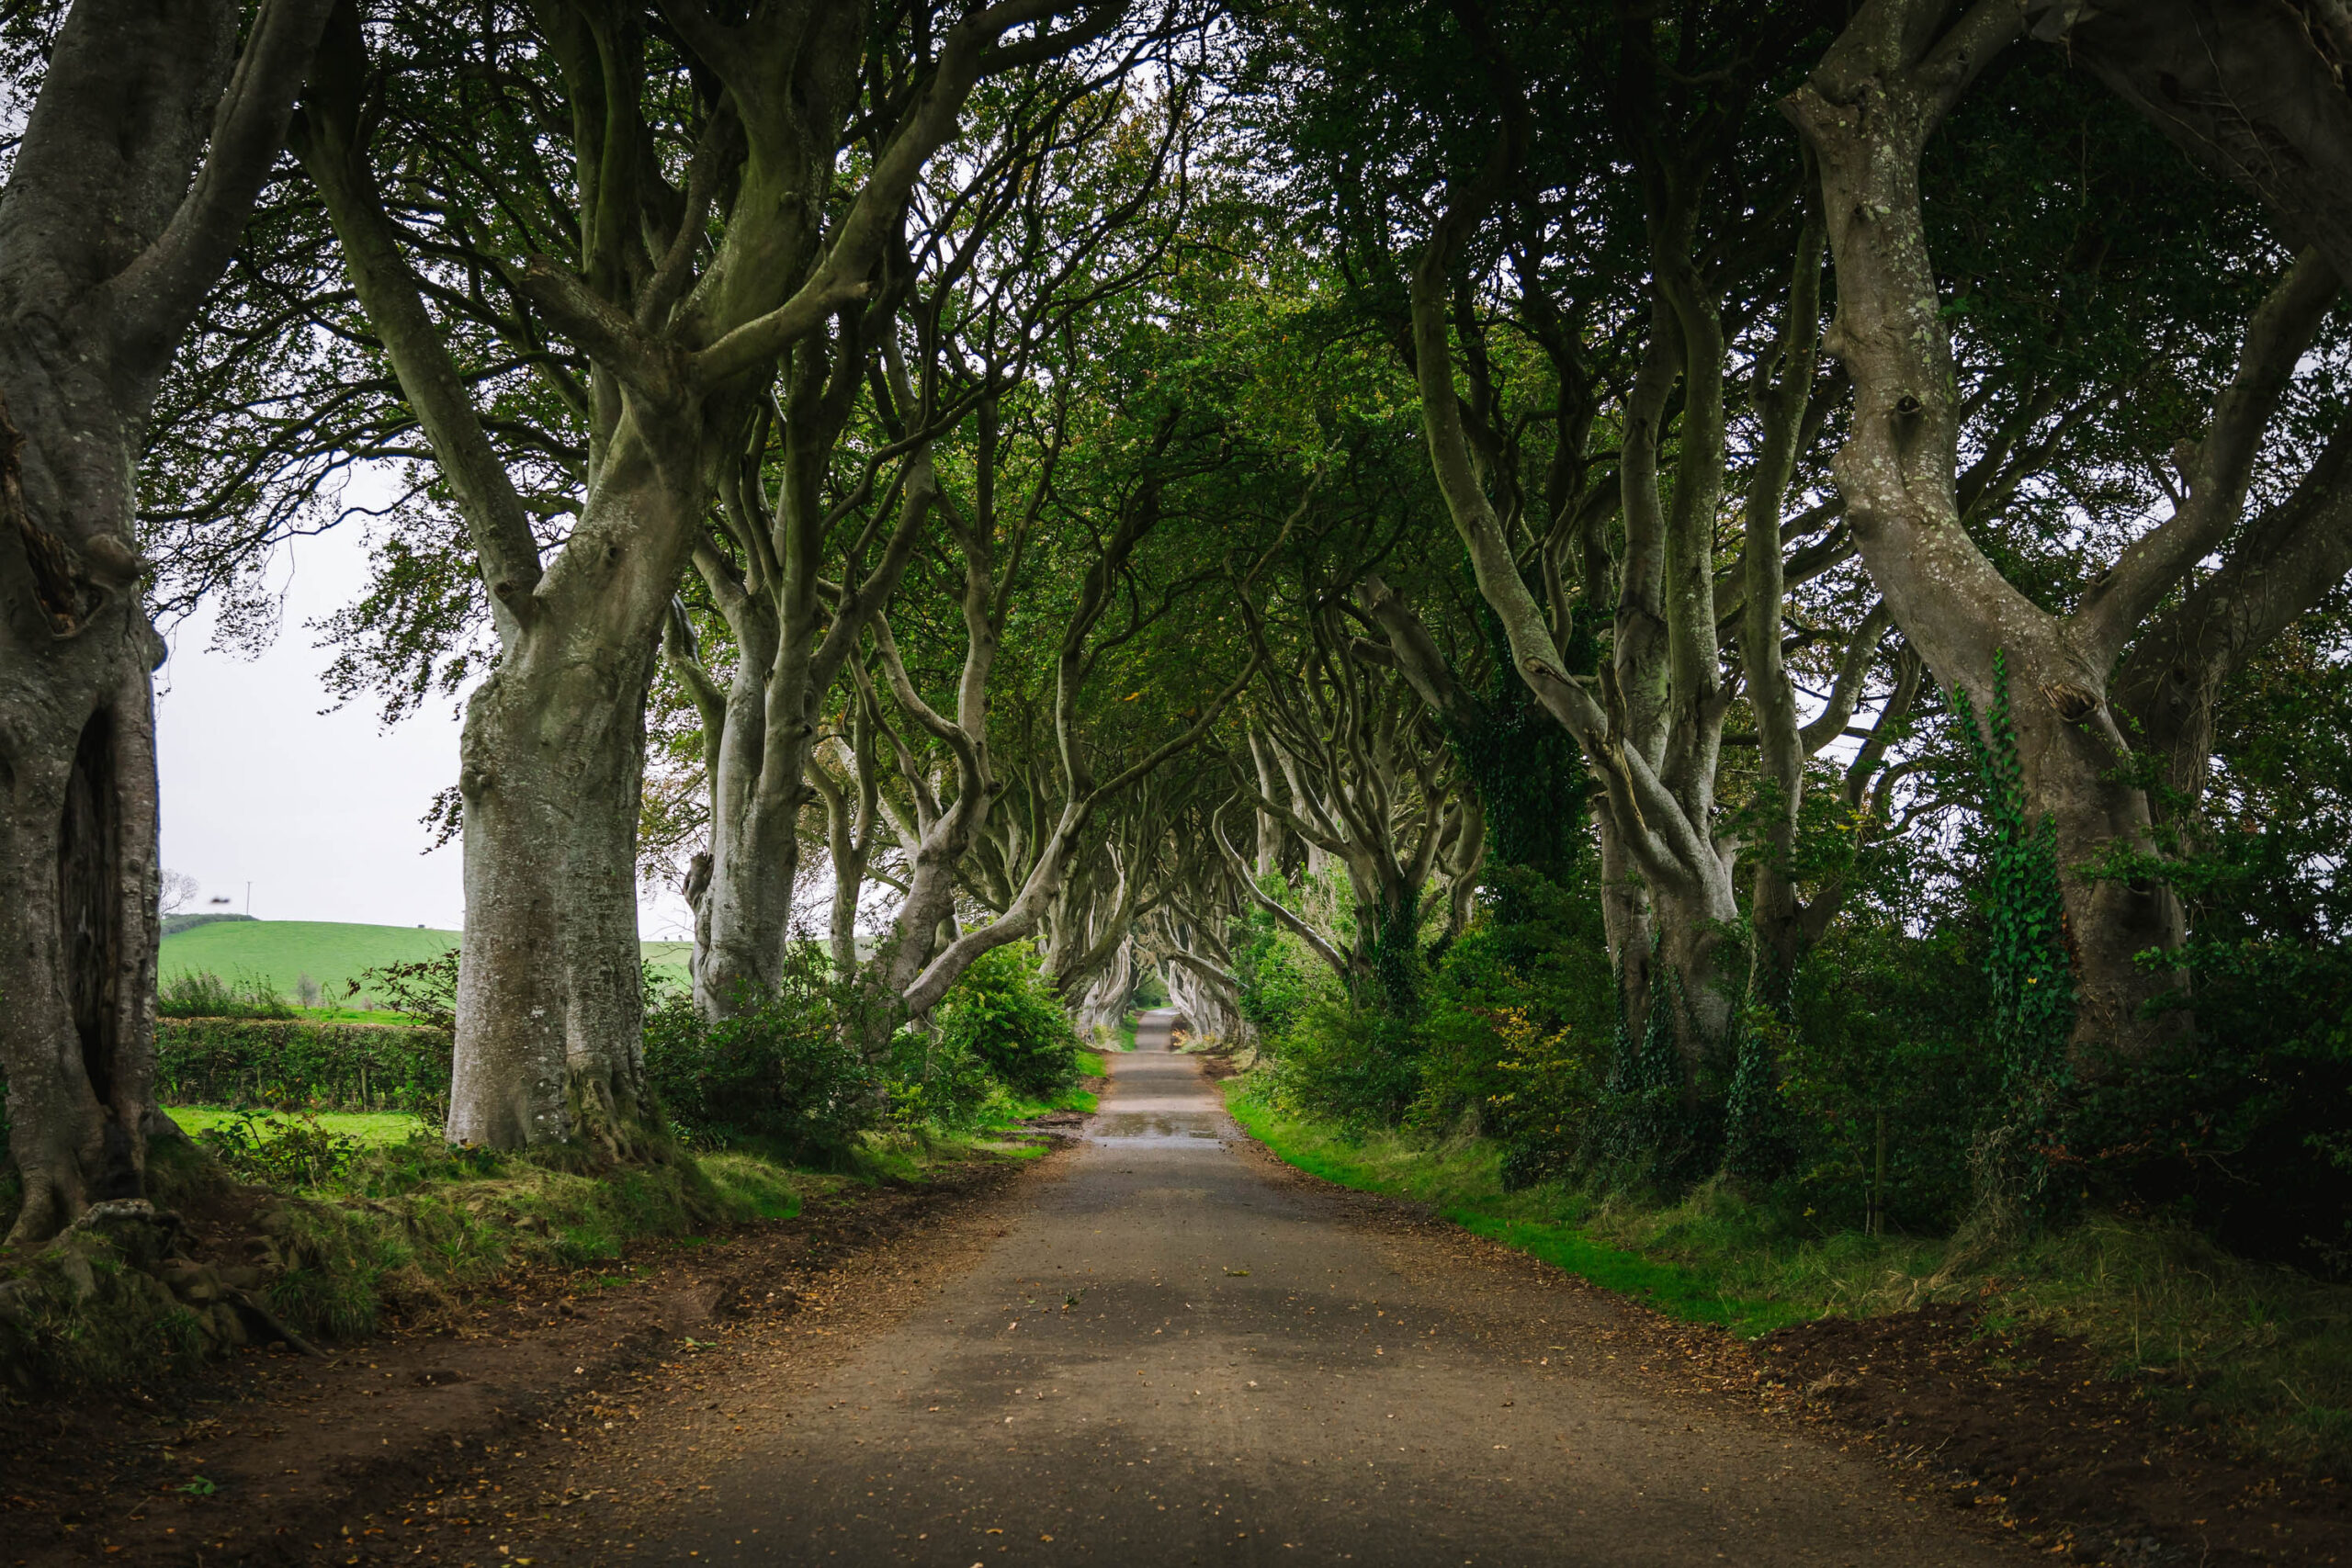 View of the Dark Hedges, located in Northern Ireland.